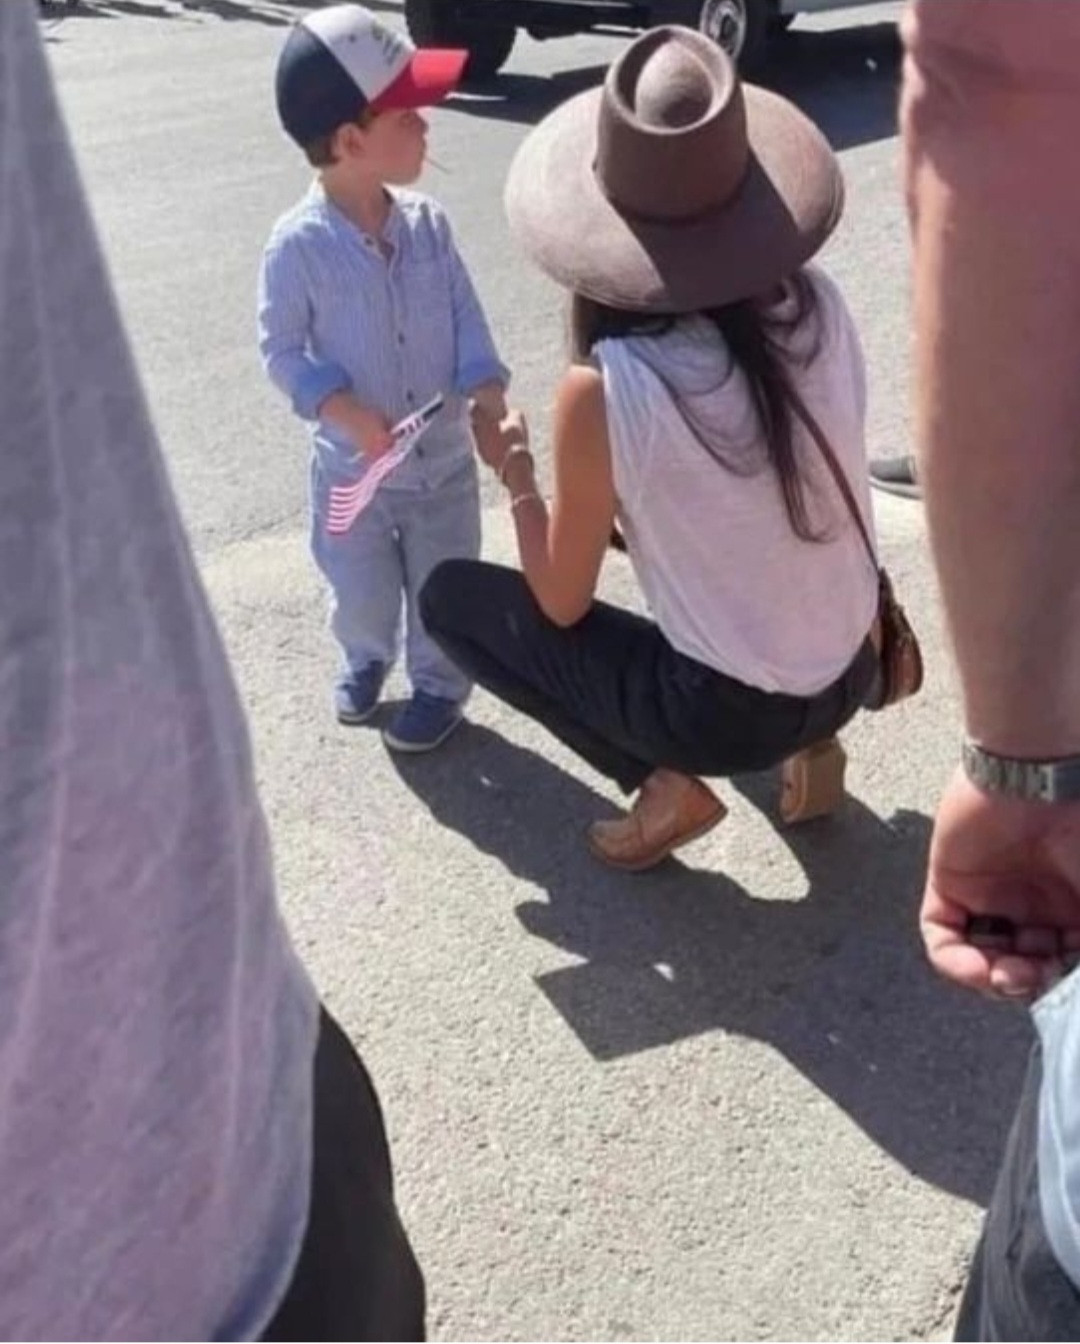 Meghan Markle, Prince Harry and Archie pictured at 4th of July parade in Wyoming (photos)